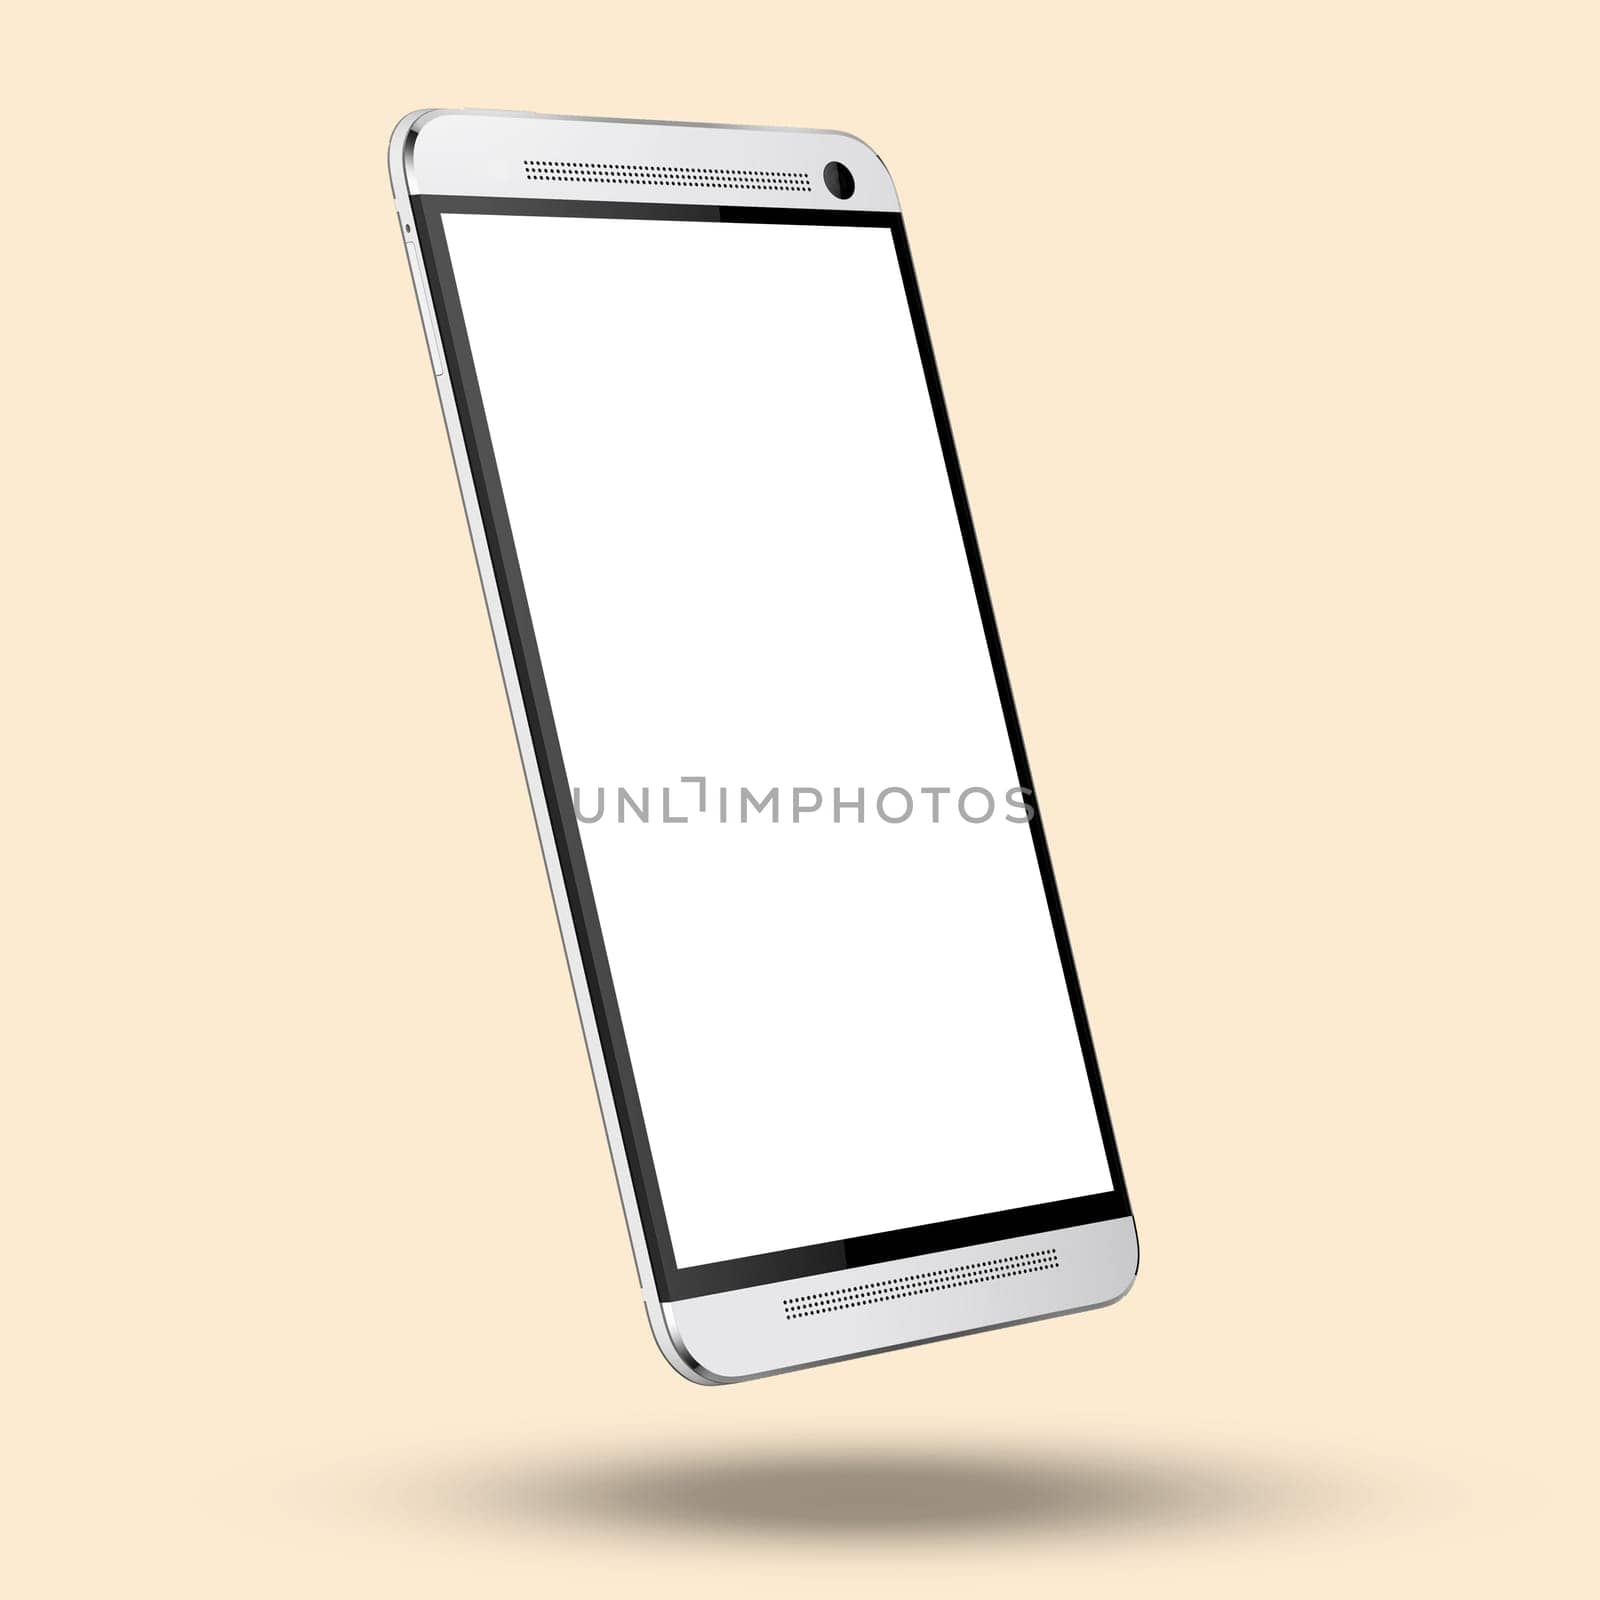 Phone, screen and mockup for digital advertising or marketing against a studio background. Mobile smartphone display with copy space for advertisement, network app or logo branding and communication.